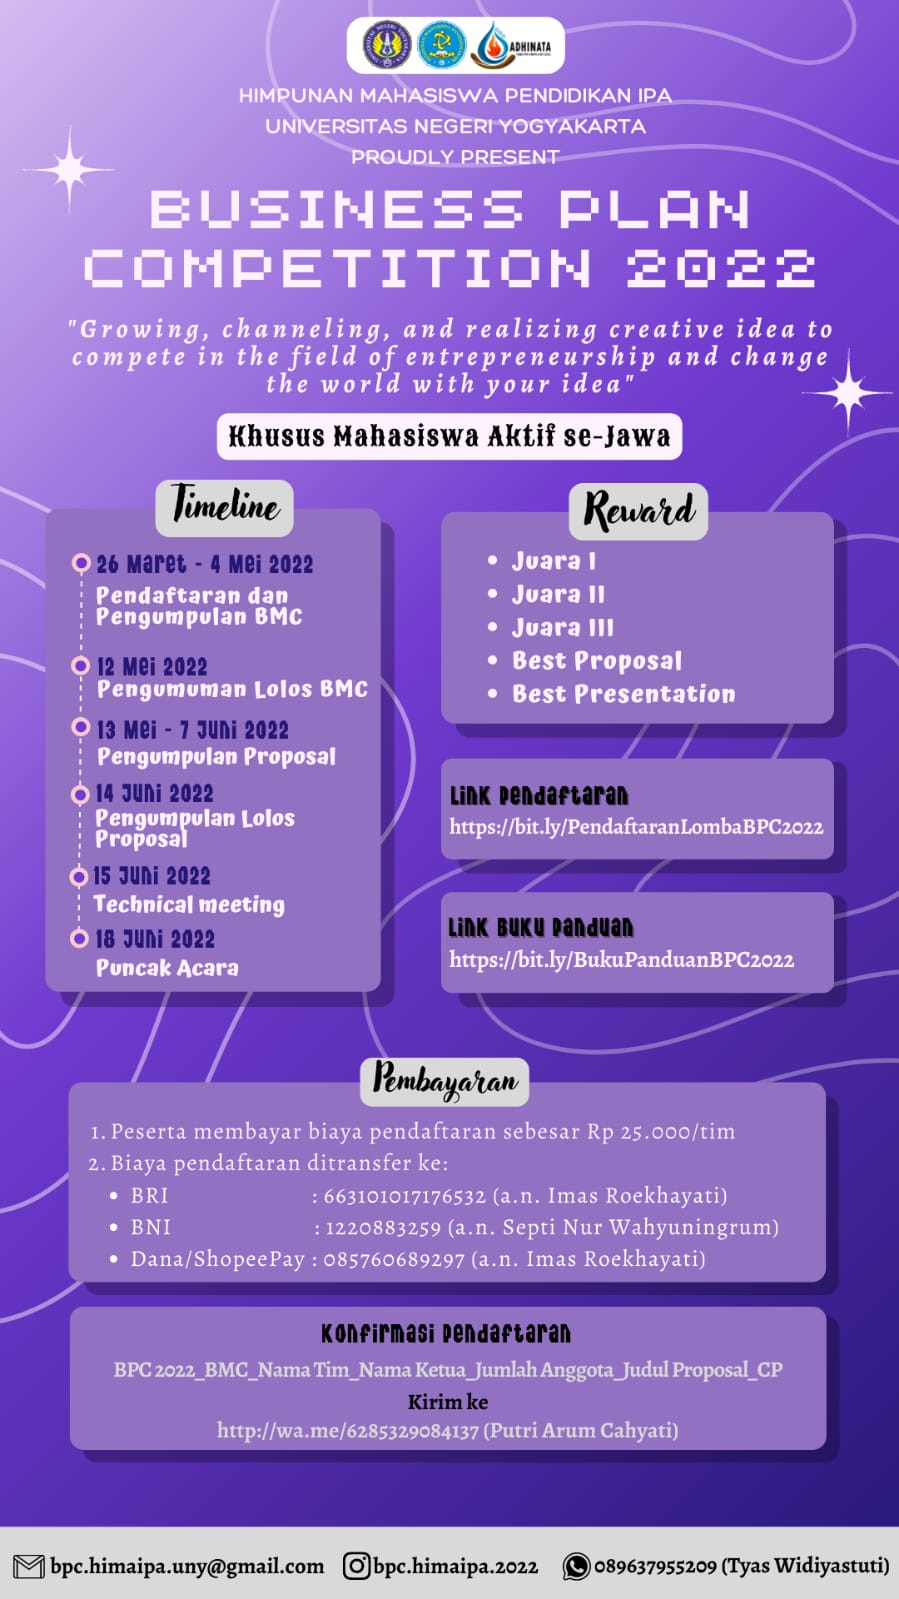 Foto  BUSINESS PLAN COMPETITION HIMA IPA UNY 2022